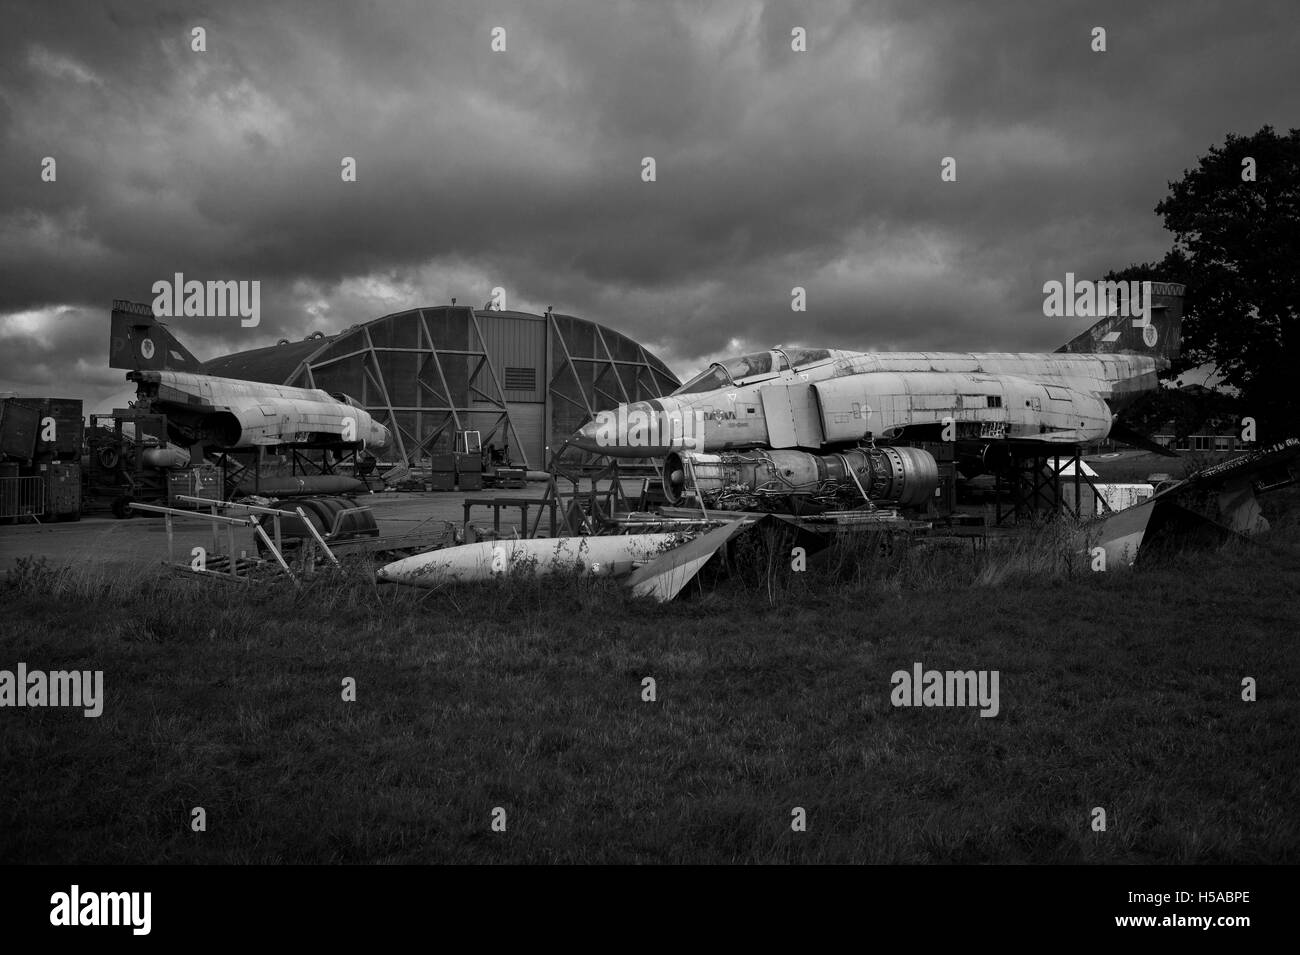 RAF Bentwaters, former USAF Nuclear Bomber Base in Suffolk England. Oct 2016 A10 Tank Buster aircraft were based here. Stock Photo